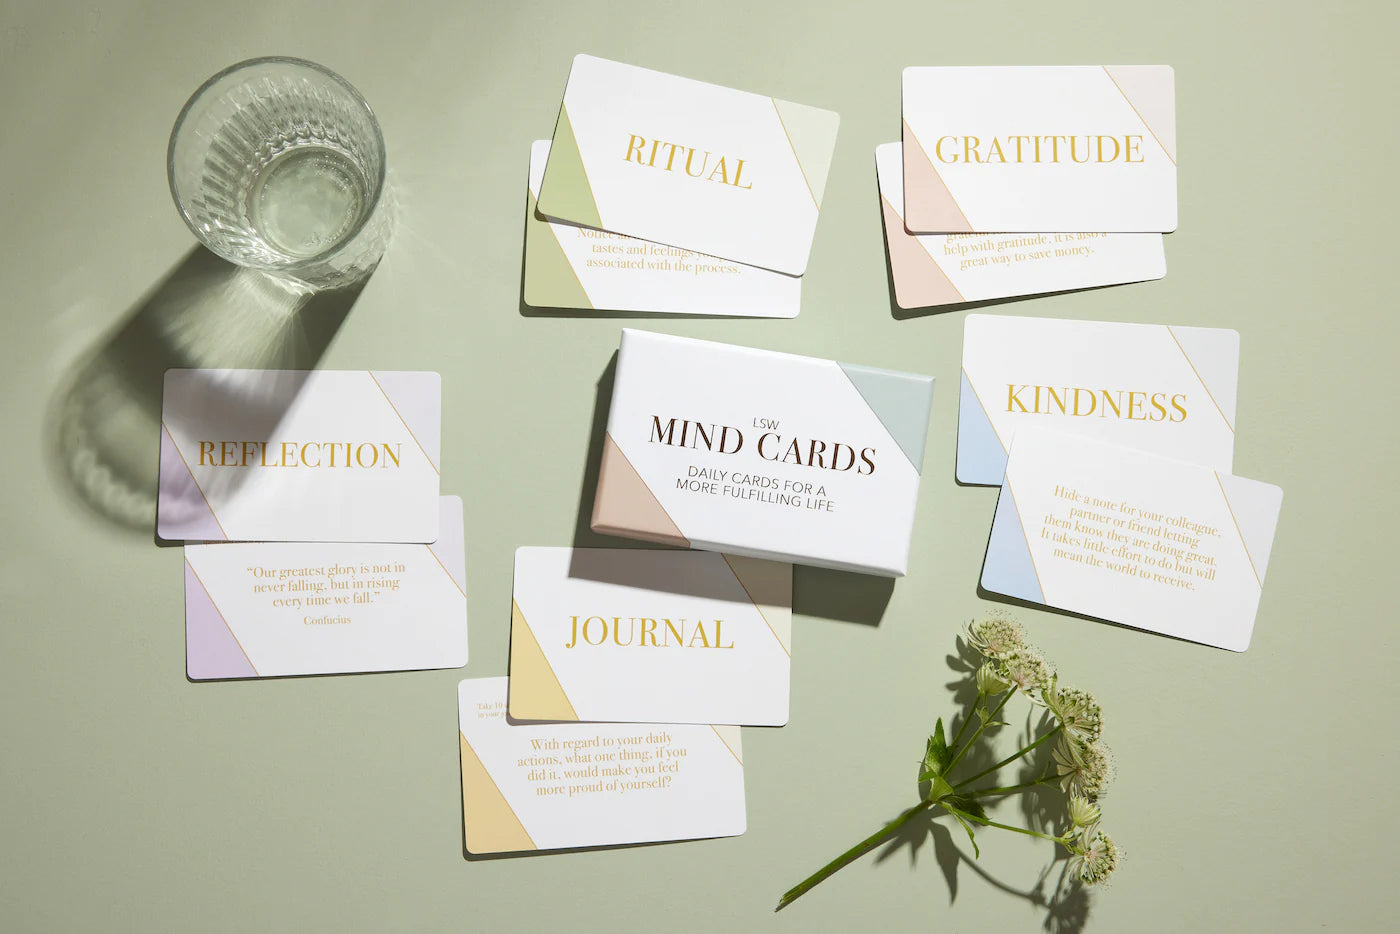 Mind Cards: Wellbeing Cards, Self Care, Mindfulness